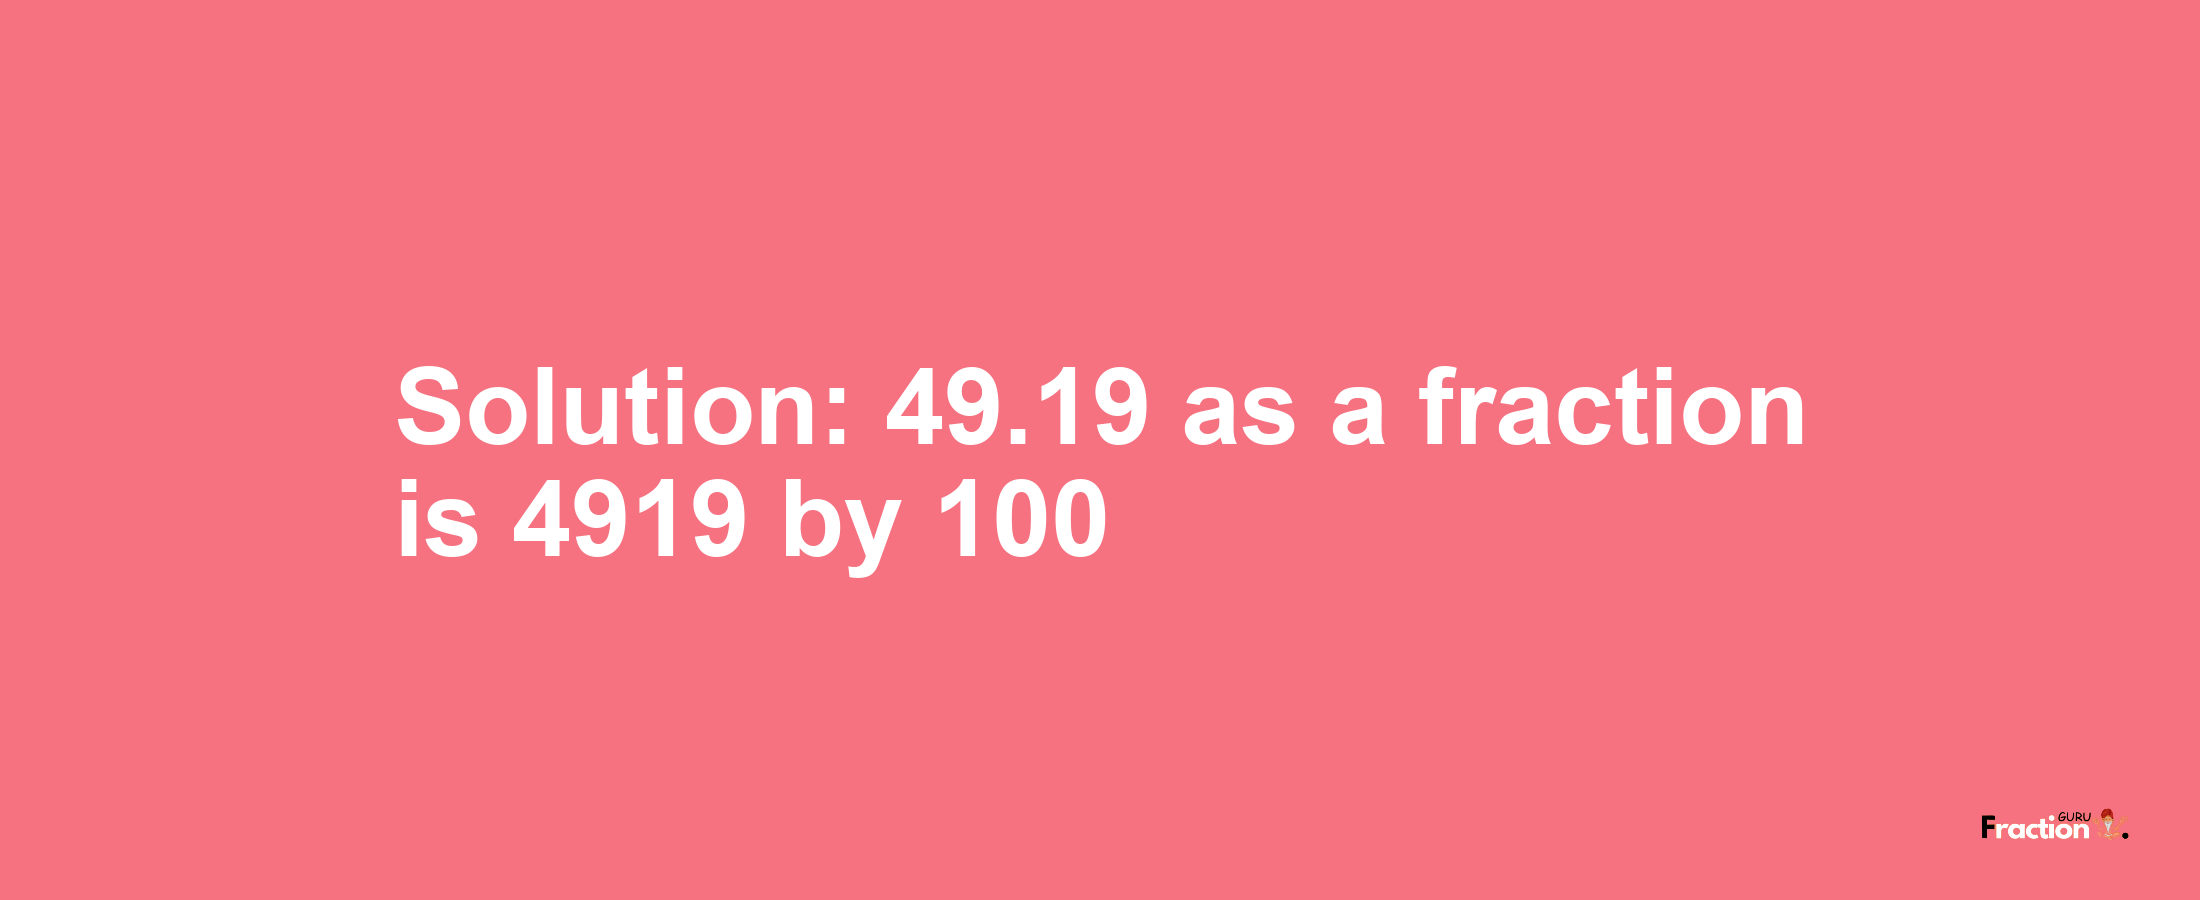 Solution:49.19 as a fraction is 4919/100